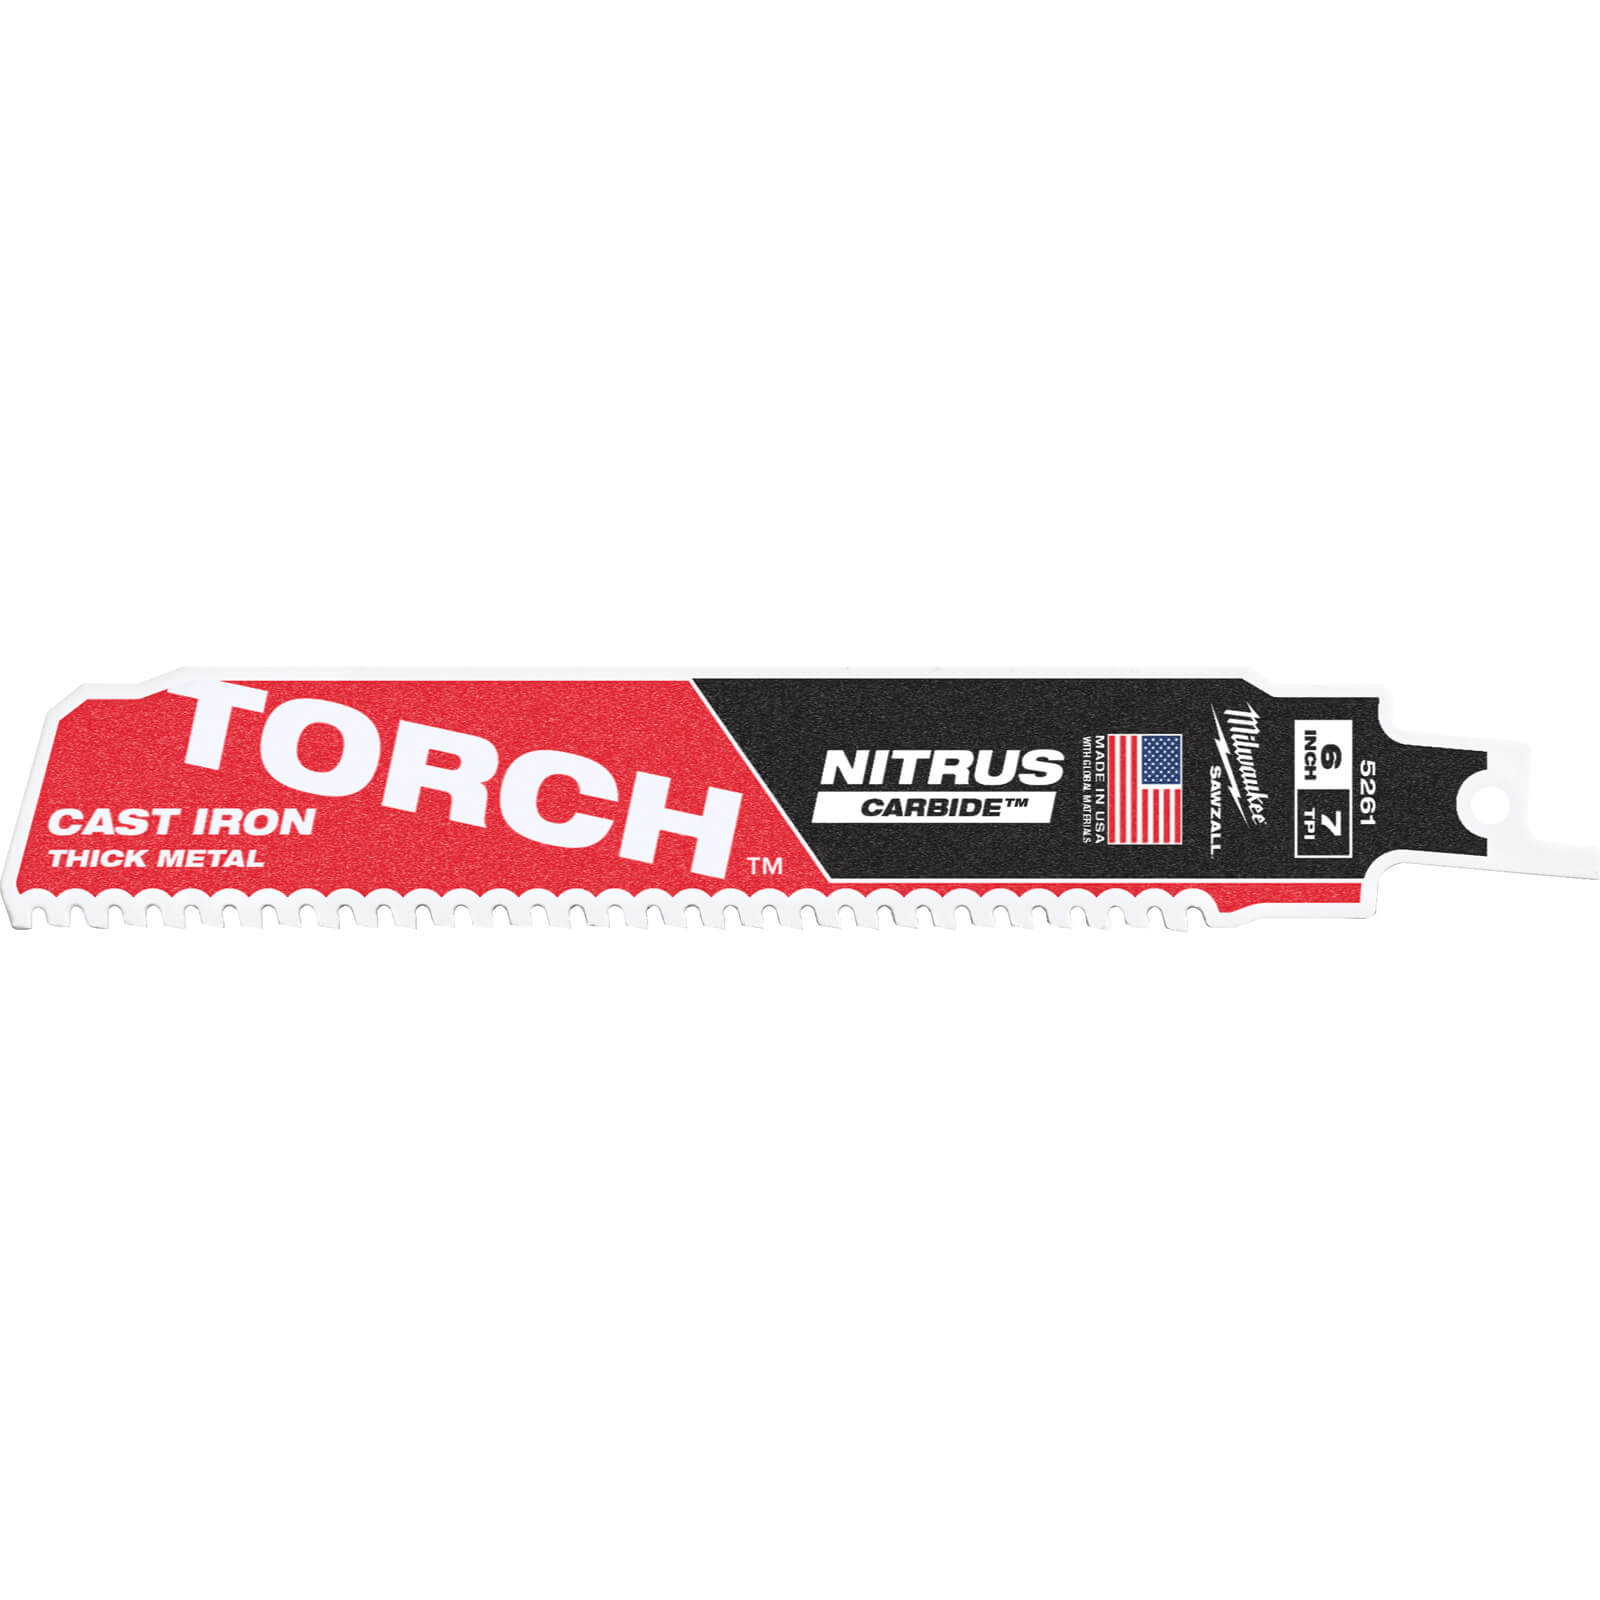 Image of Milwaukee Heavy Duty TORCH Nitrus Carbide Reciprocating Sabre Saw Blades 150mm Pack of 1